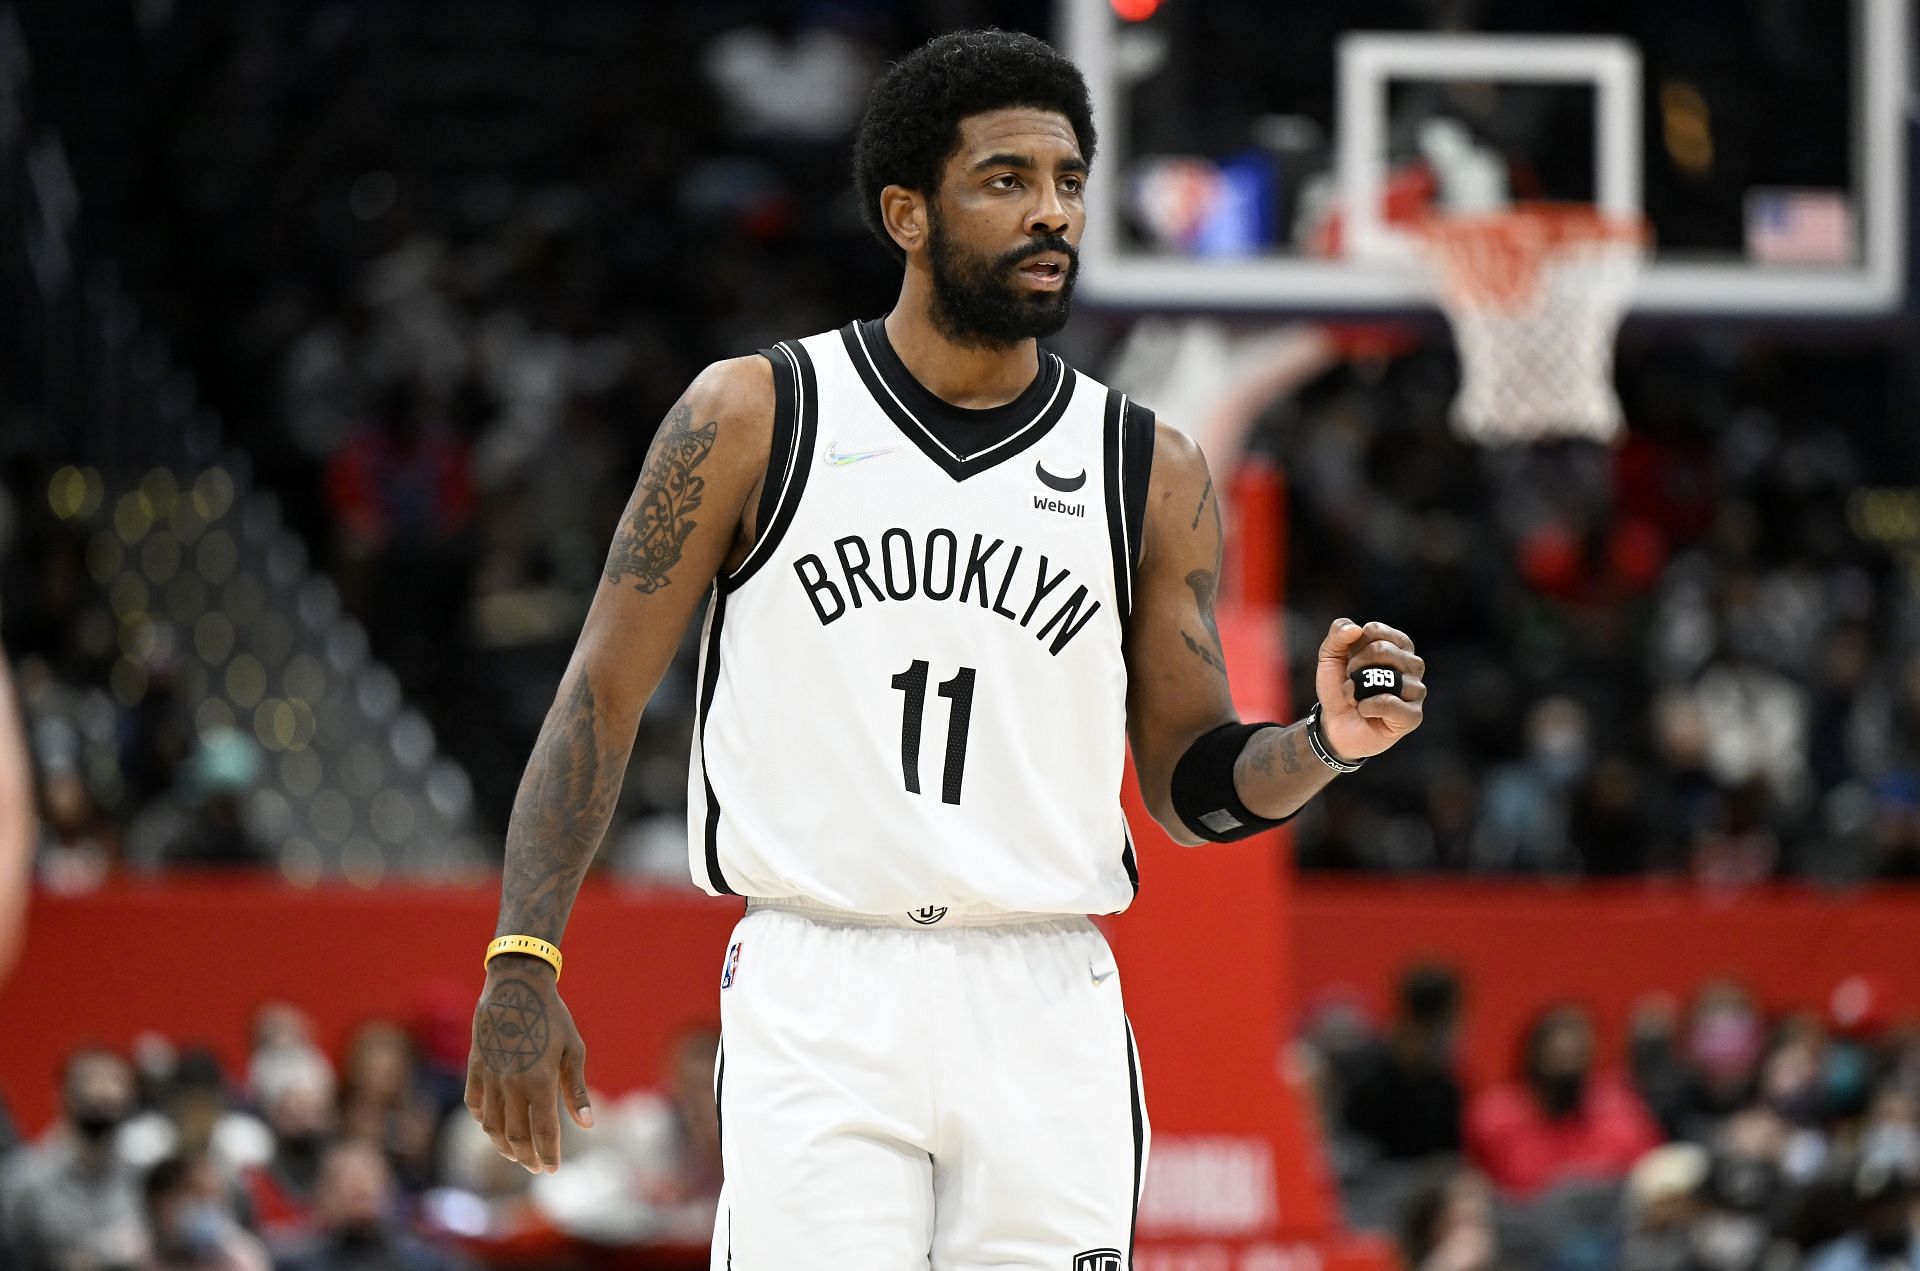 Brooklyn Nets star Kyrie Irving could potentially play in home games.